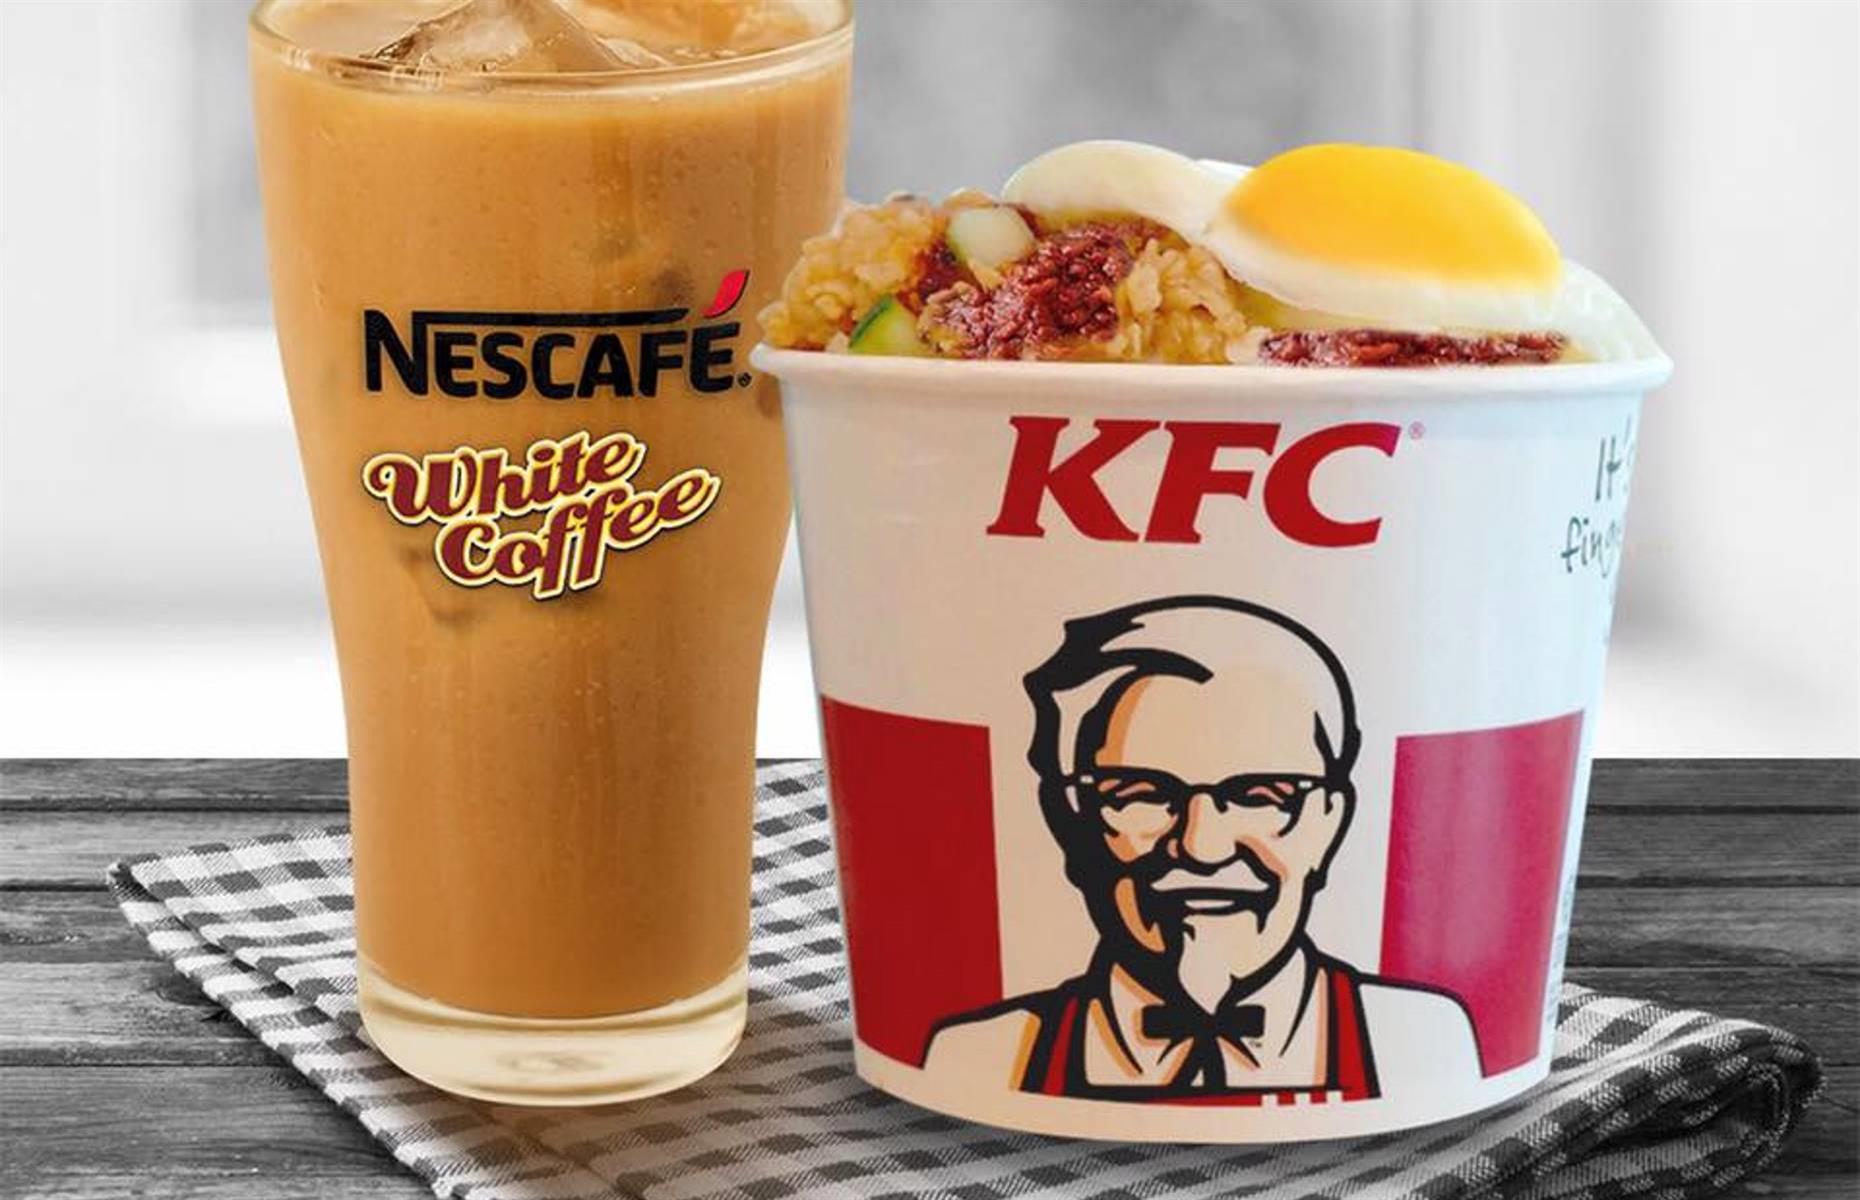 <p>If you happen to be at a KFC in Malaysia at breakfast time, you’ll be faced with a menu that offers dishes you can’t get anywhere else. The Sambal Rice Bowl – rice topped with sambal sauce, Zinger Fillet chunks, cucumber and a sunny-side up egg – was launched in 2017. Sadly it's no longer available, though Zinger Porridge and Nasi Lemak make pretty decent replacements.</p>